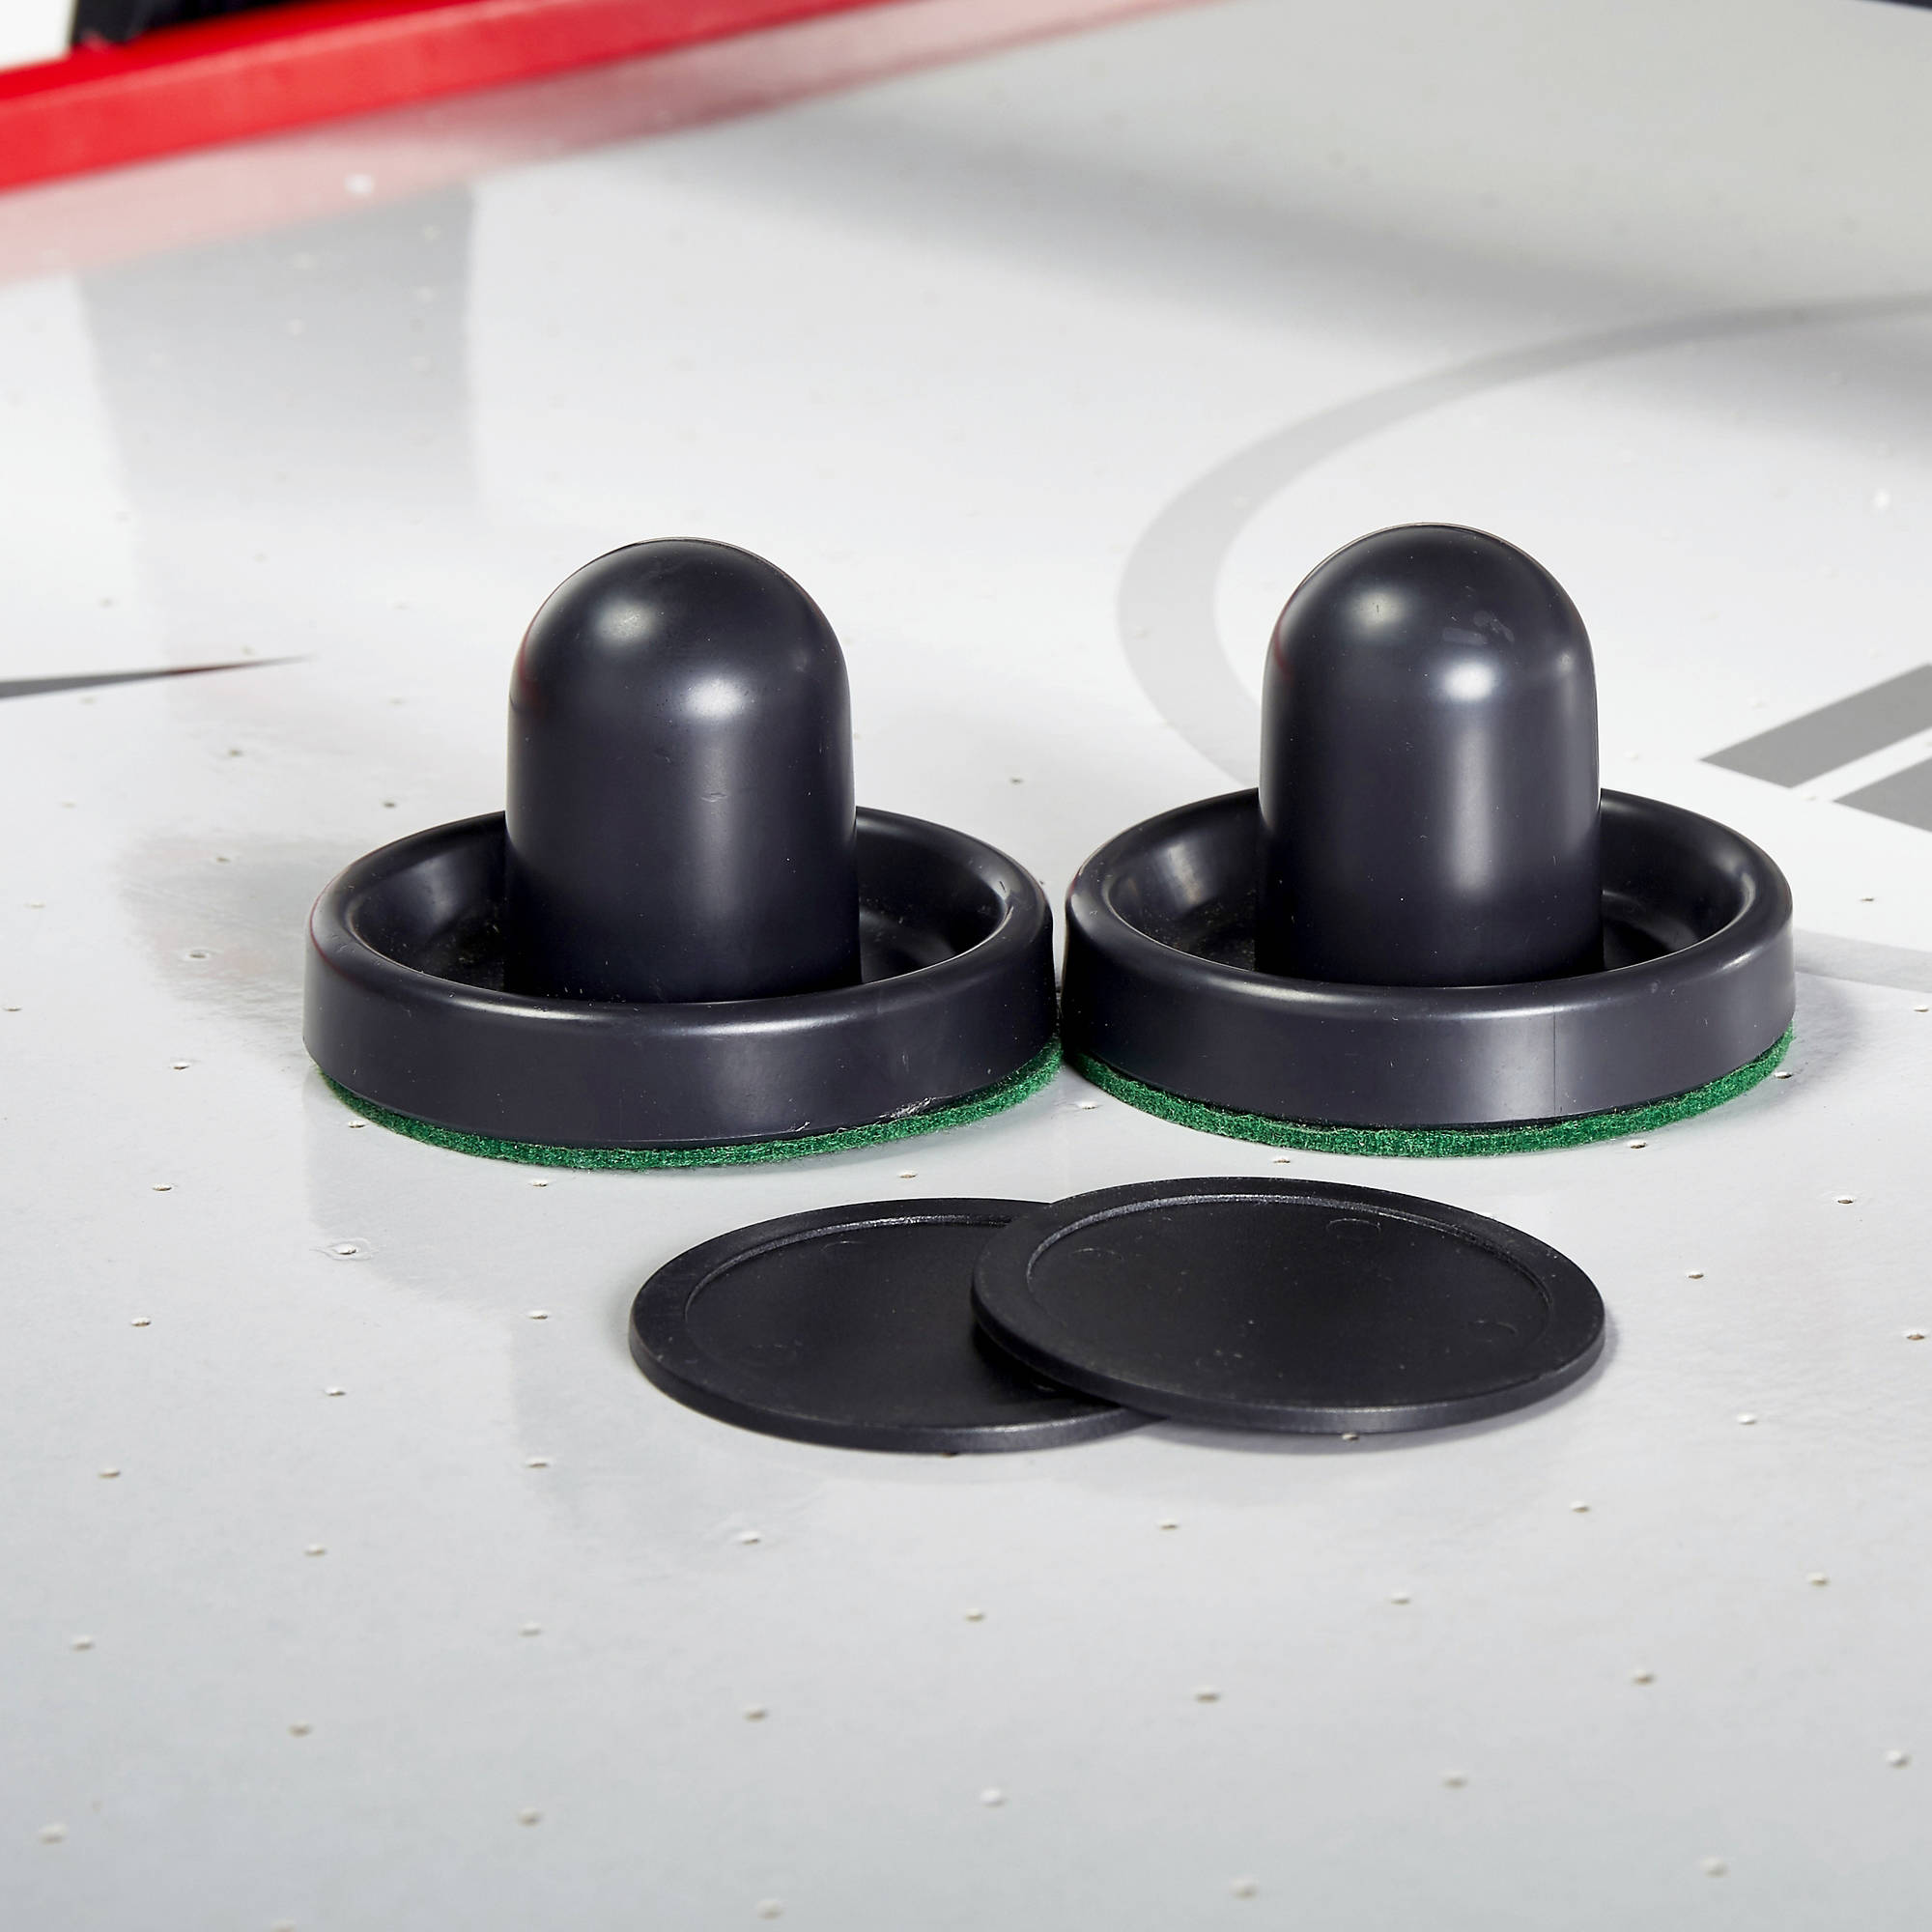 ESPN 60" Air Powered Hockey Table with Overhead Electronic Scorer, Accessories Included, Black/Red - image 8 of 8